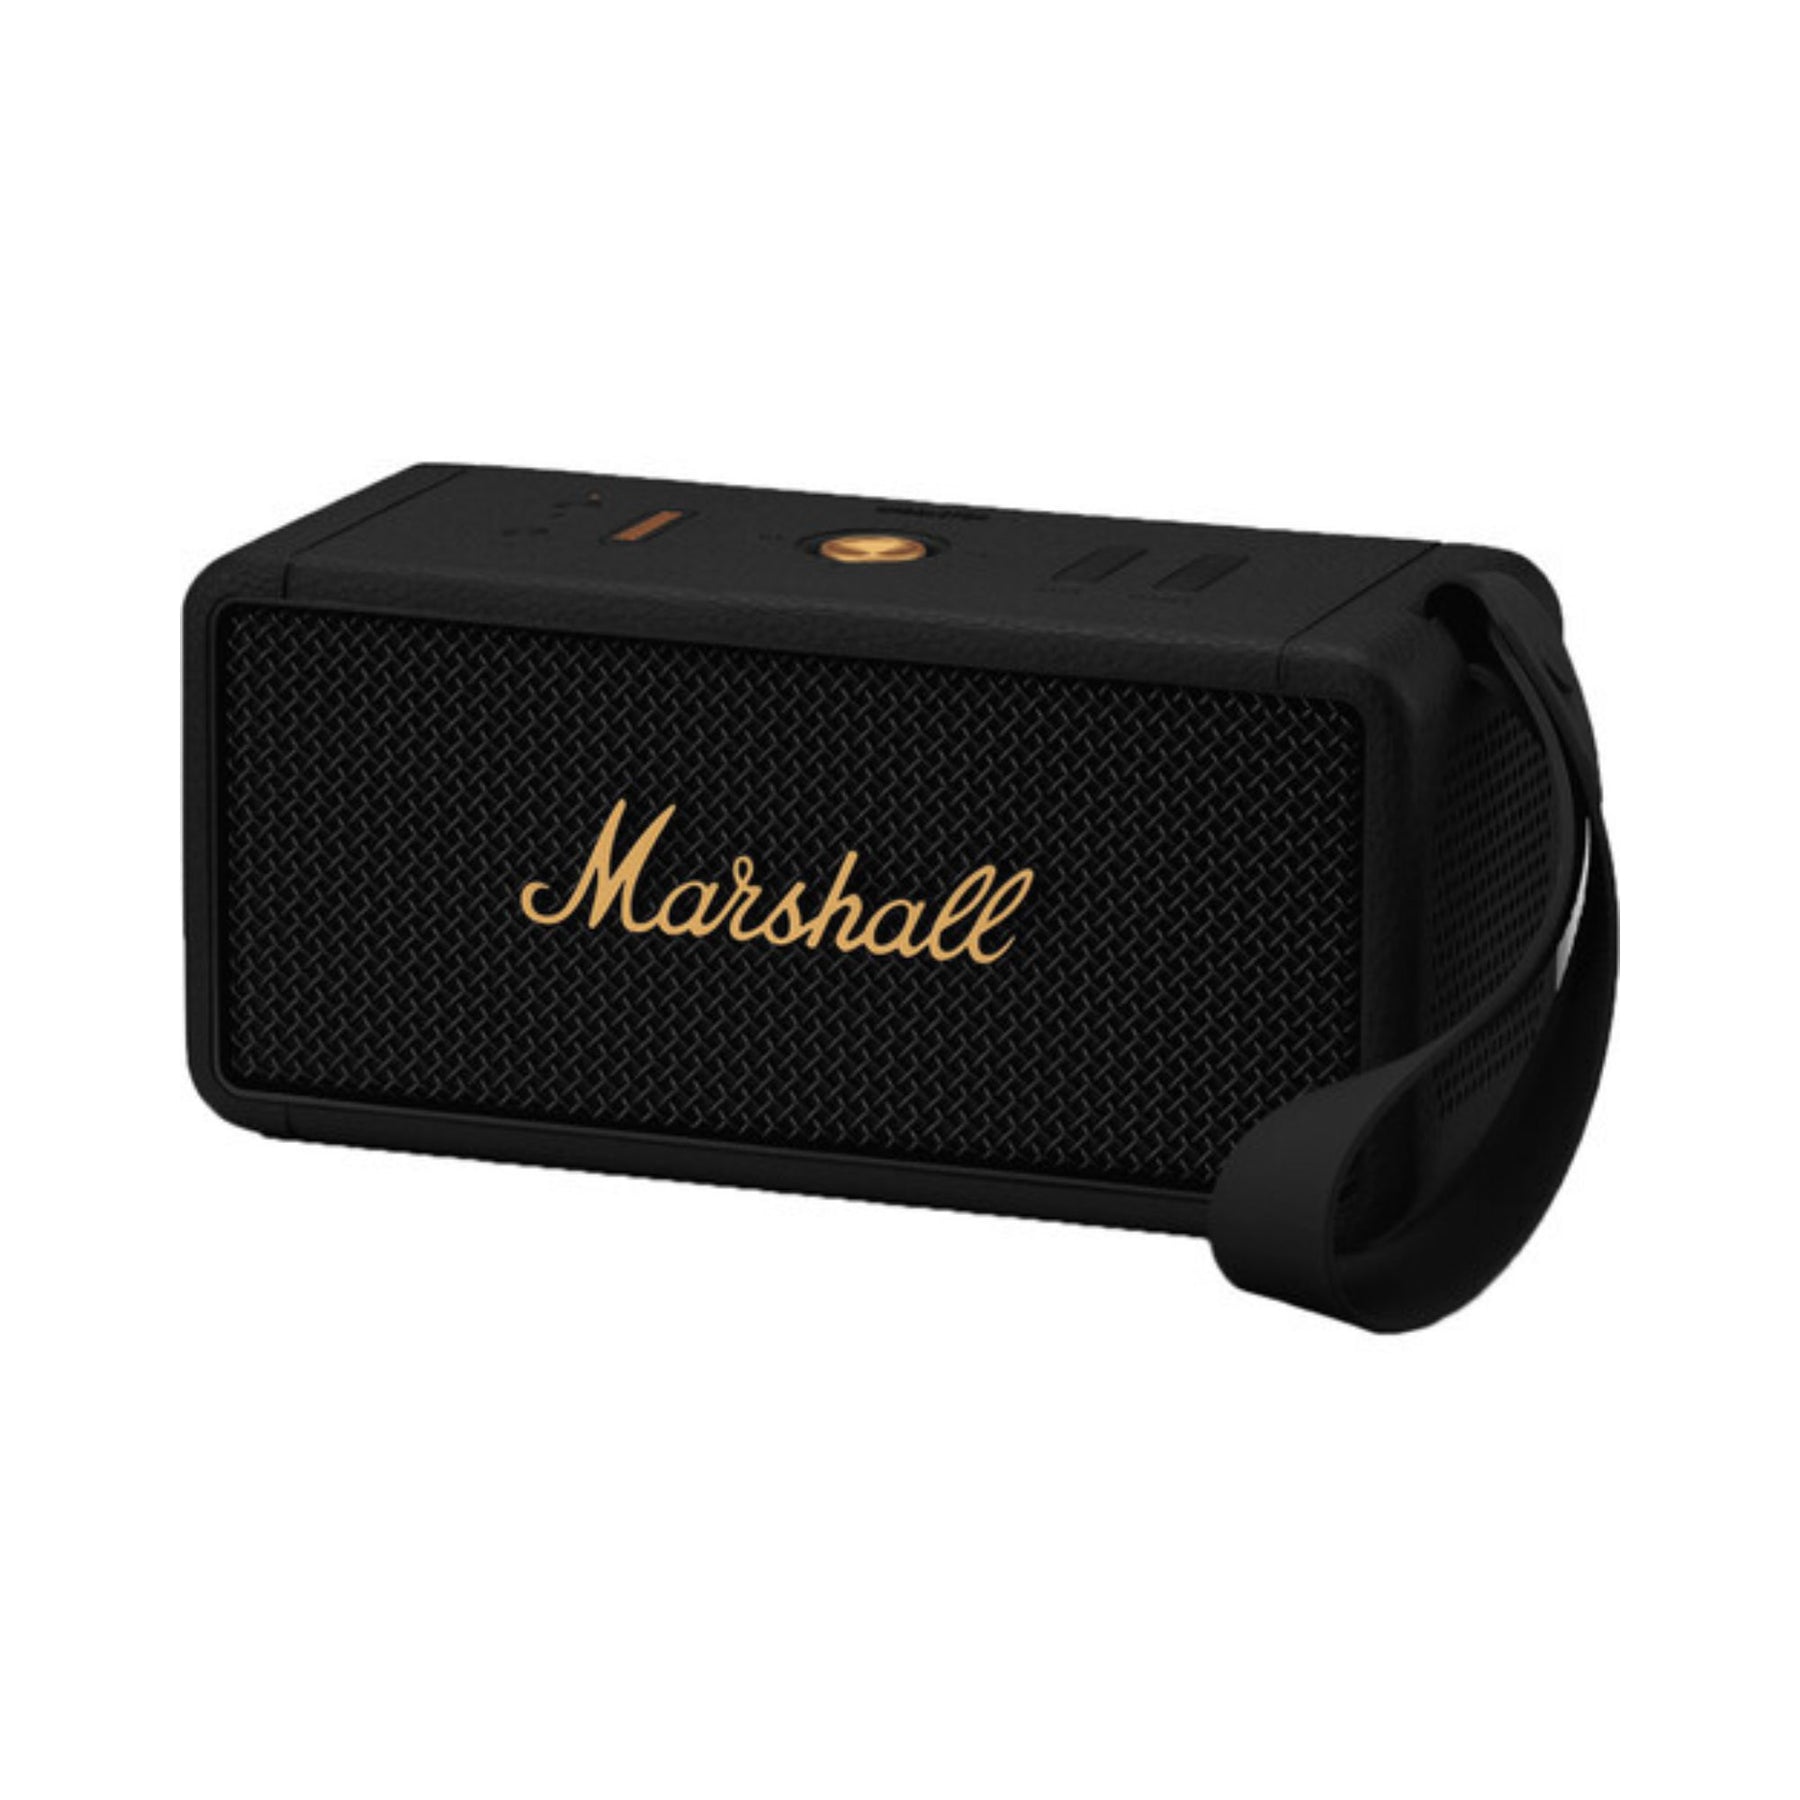 Get the iconic Marshall Stanmore II Bluetooth speaker for 10% off